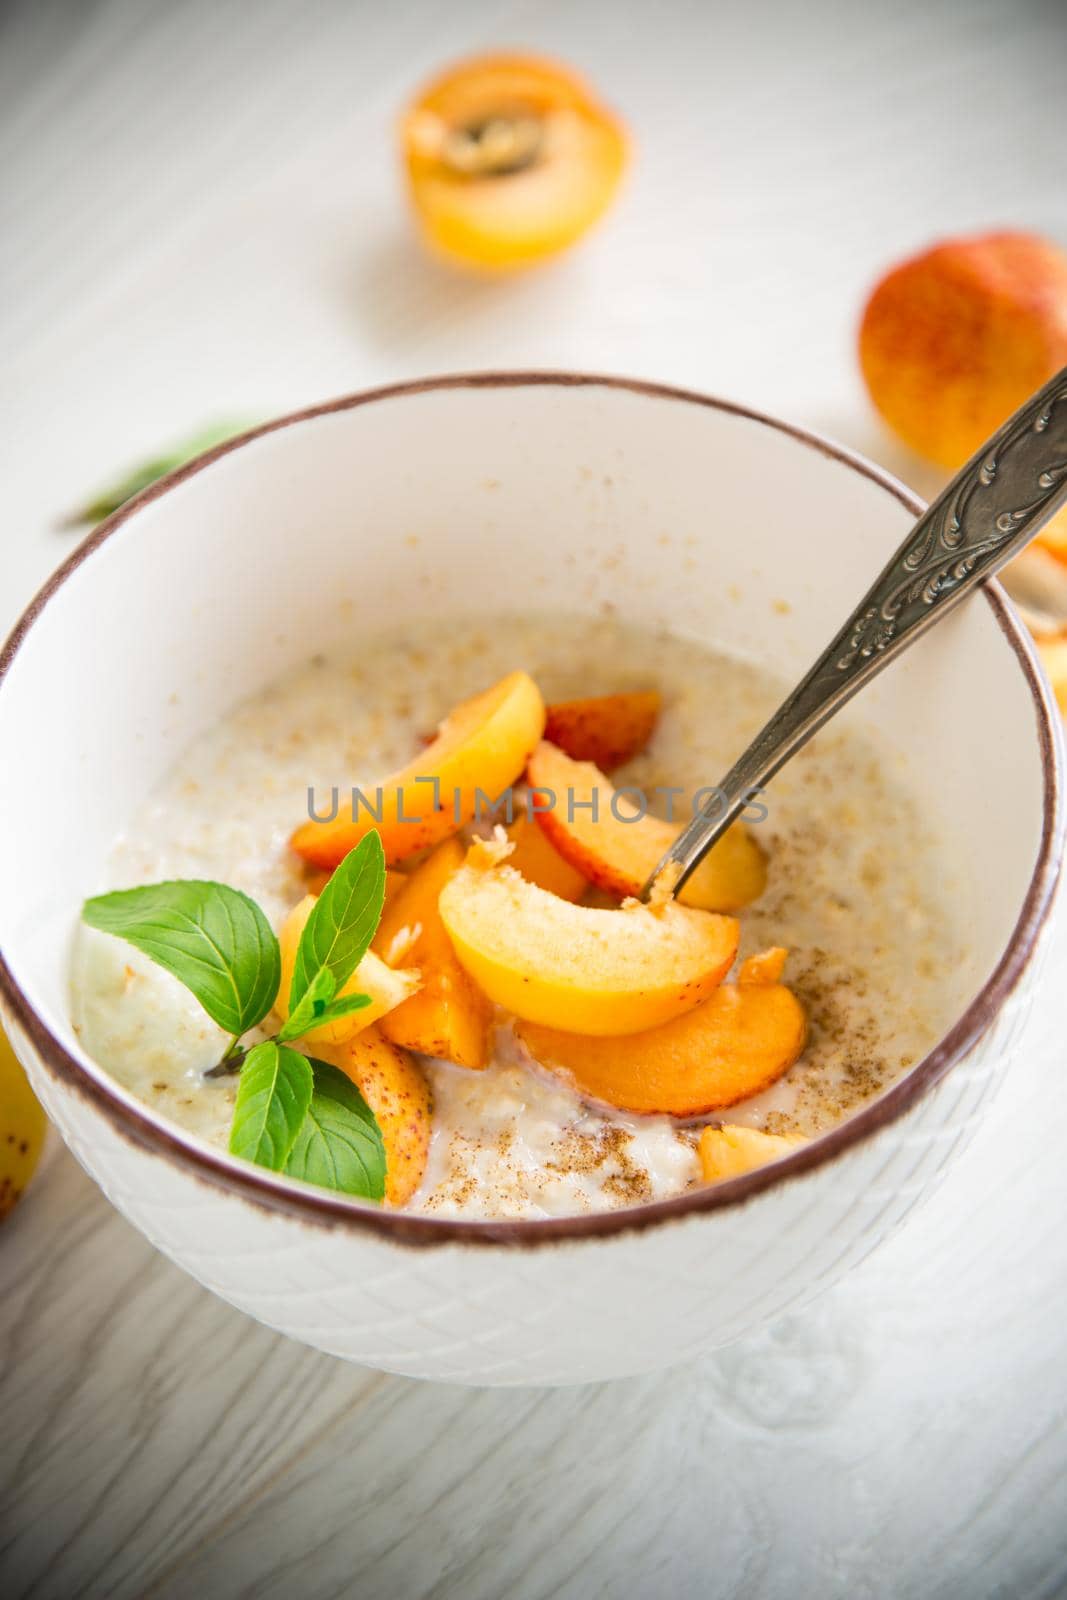 Healthy breakfast of boiled oatmeal with fresh apricots in a bowl on the table.